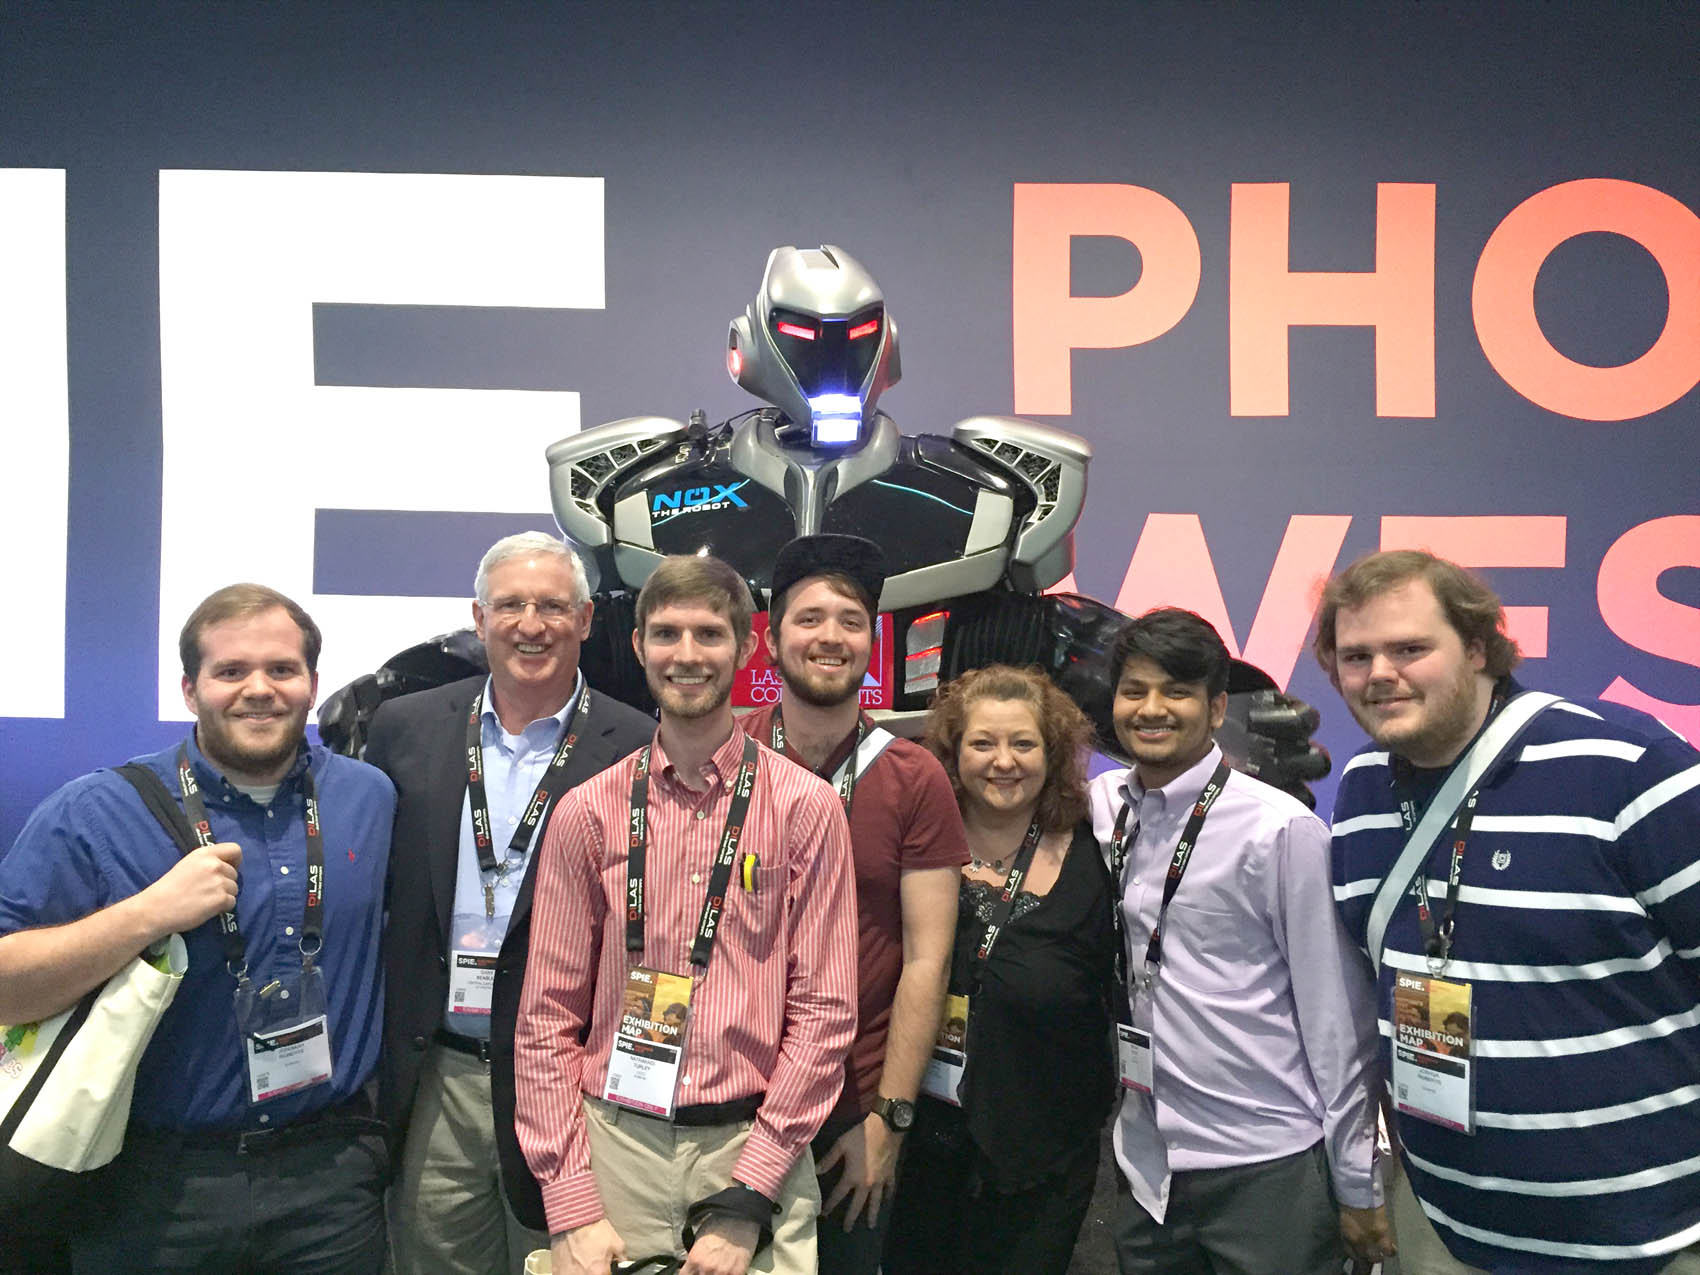 CCCC students attend national photonics convention